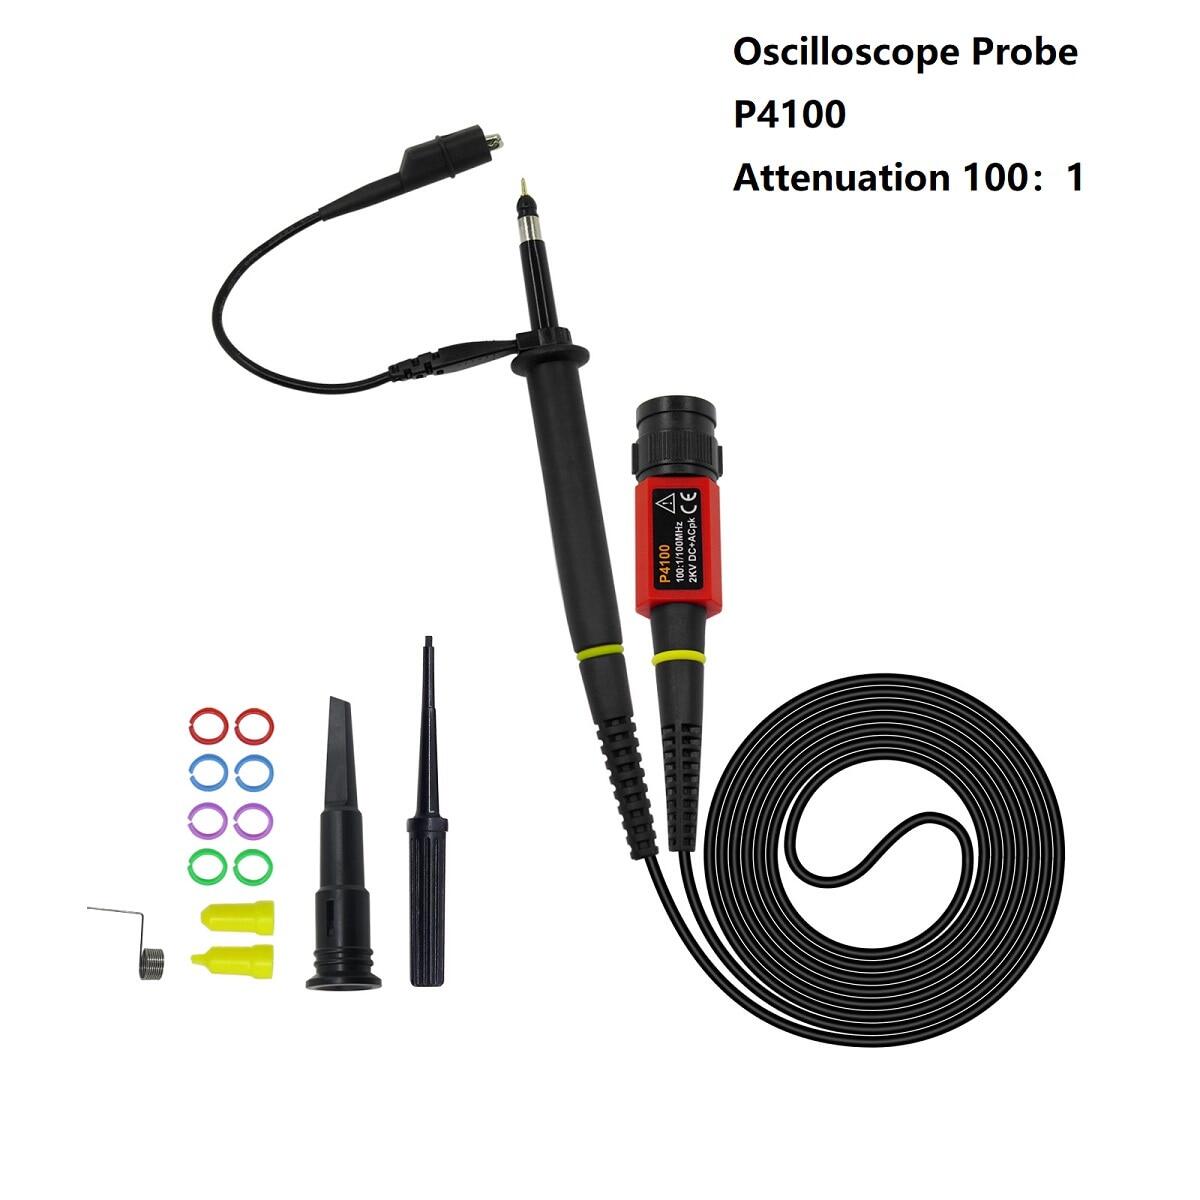 P7100 100MHz-300MHz Oscilloscope Scope Test Probe 3.5NS BNC Clip Cable Leads Kit 